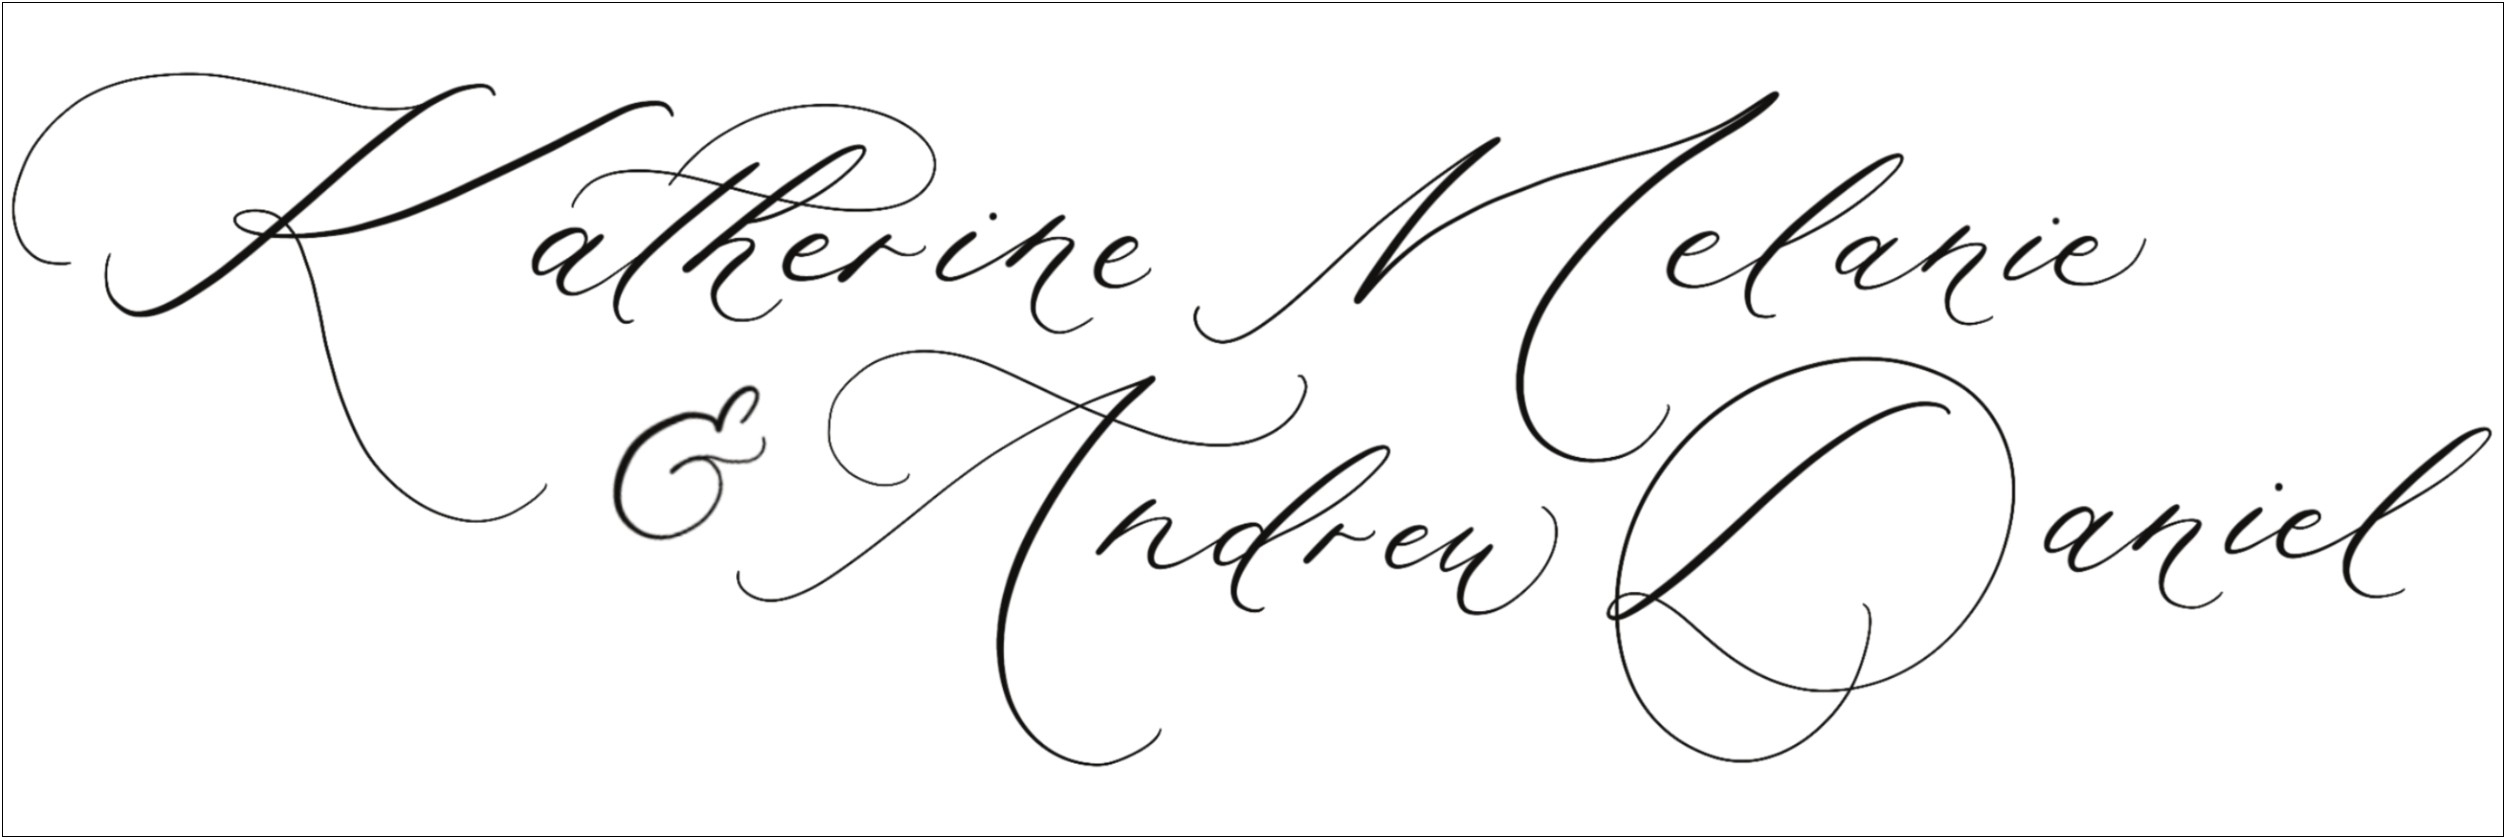 Popular Calligraphy Fonts For Wedding Invitations